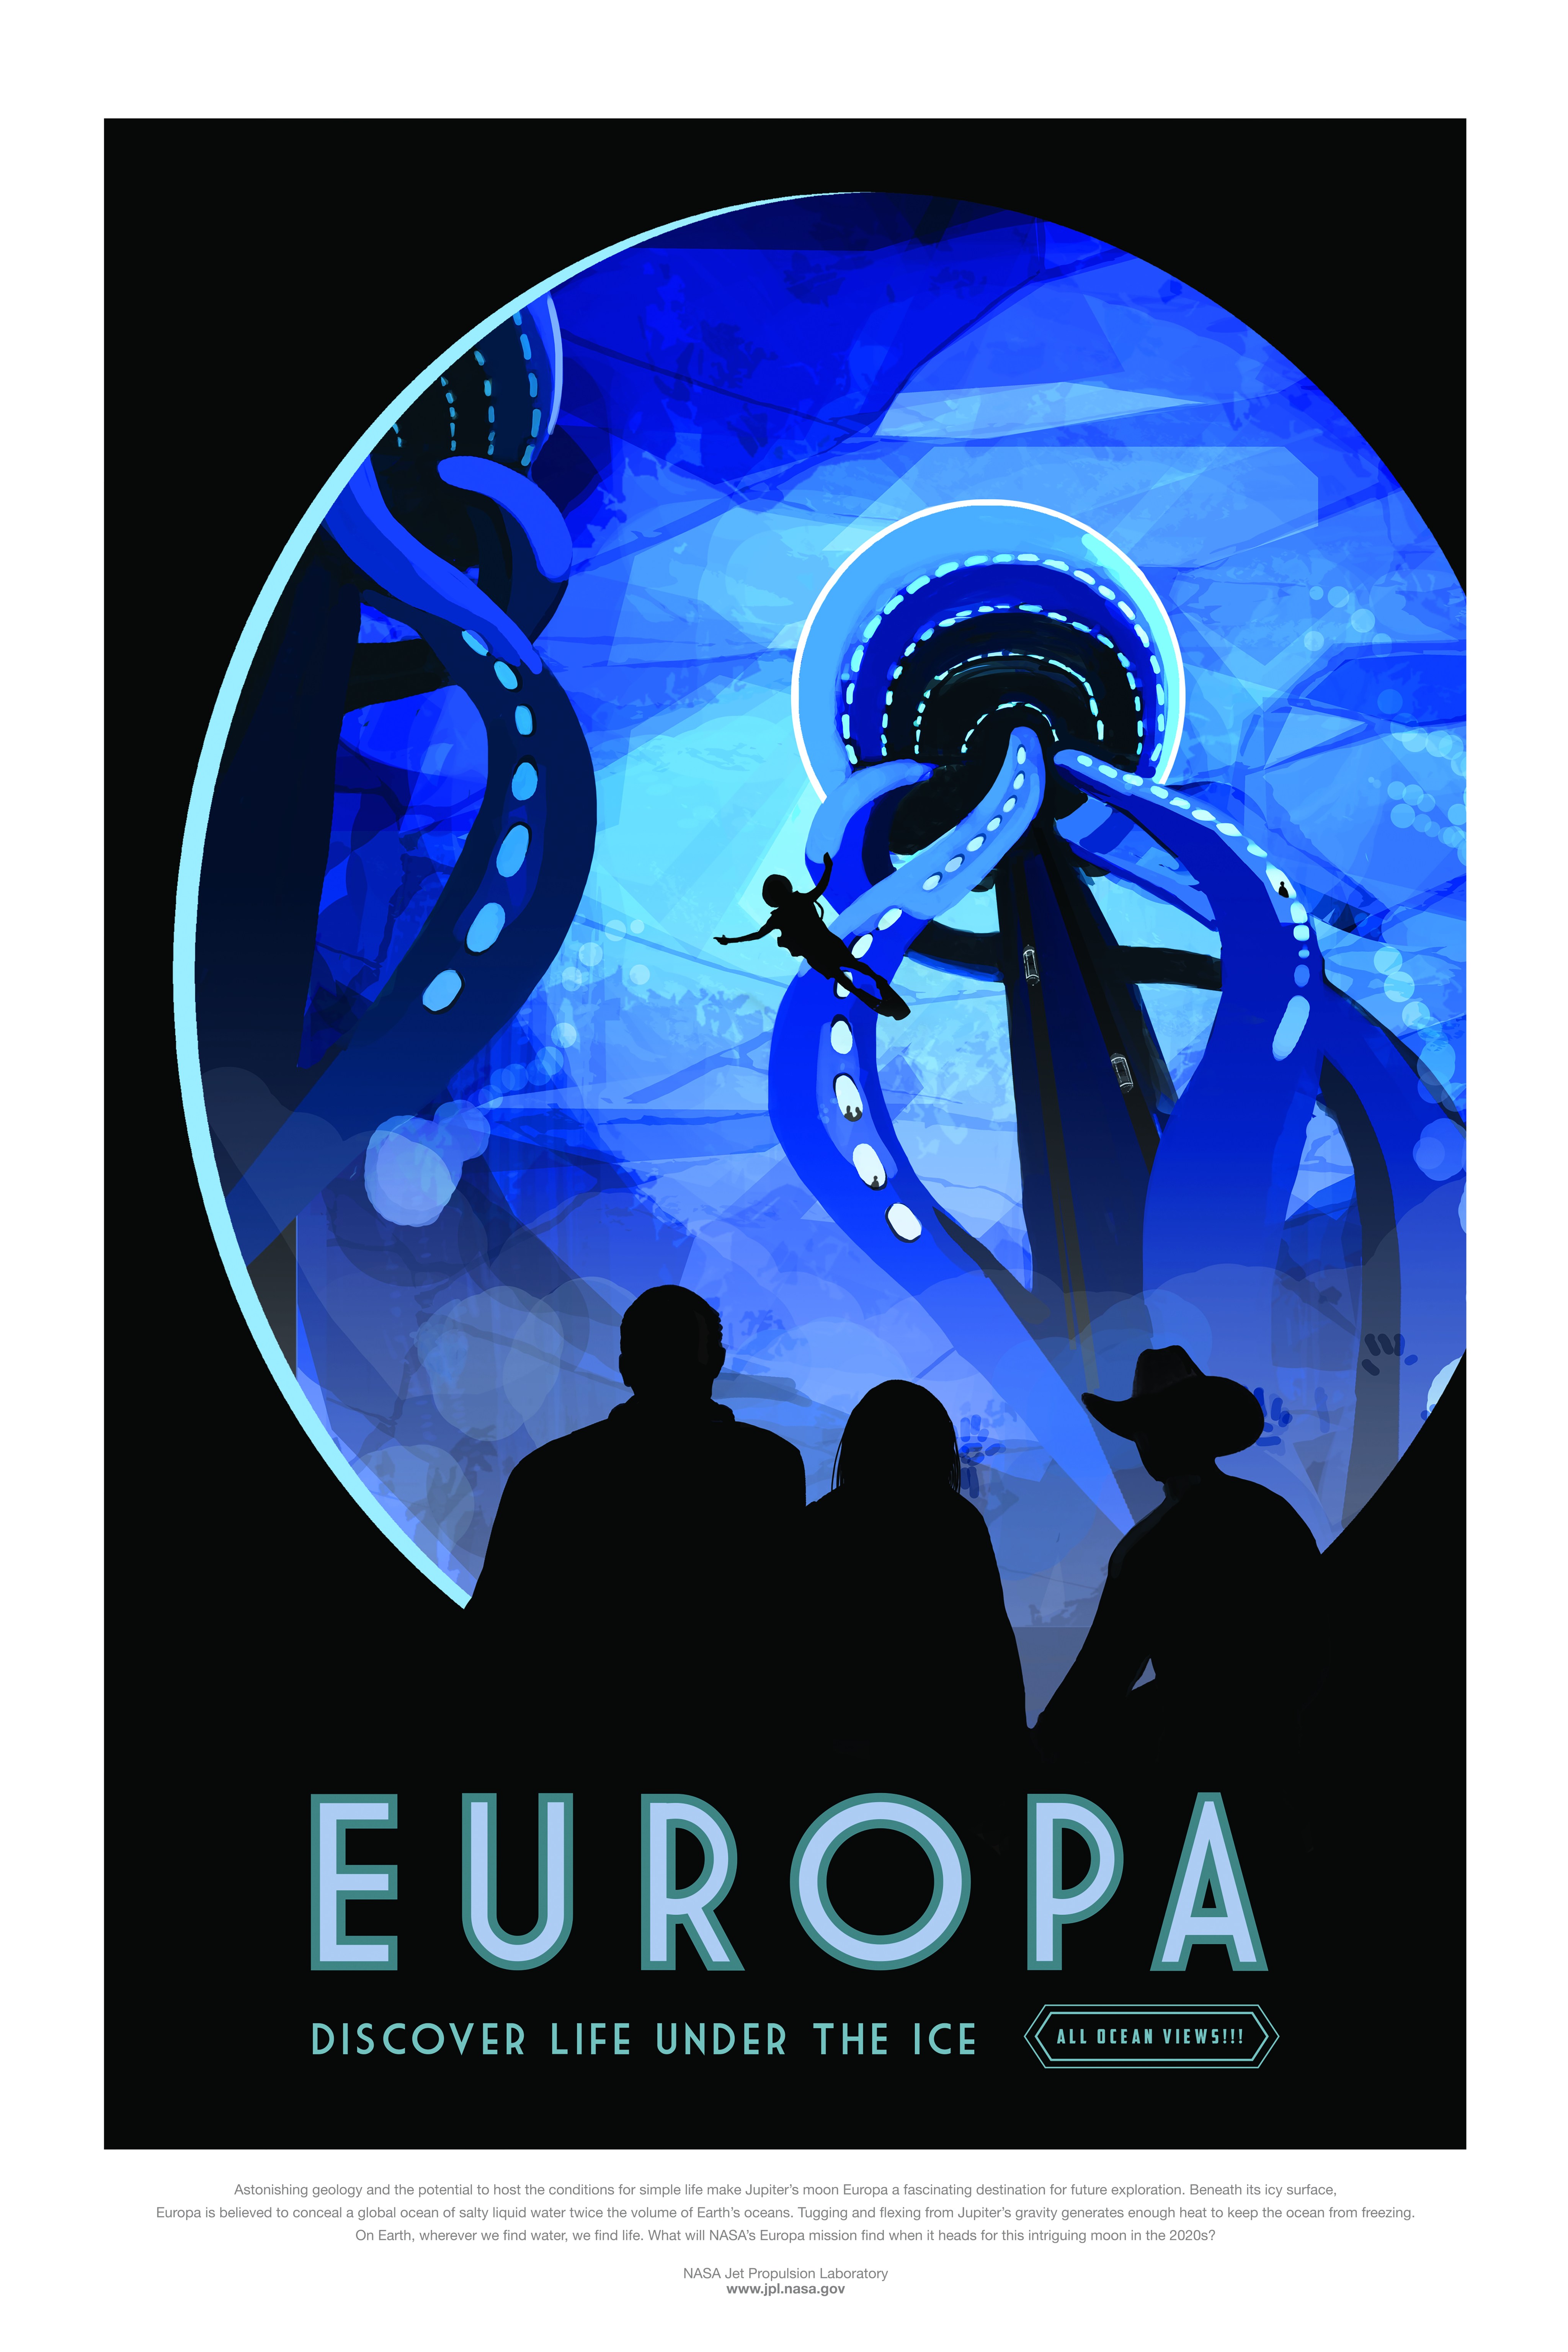 A fanciful blue, black, and white illustration of space tourists at Europa.